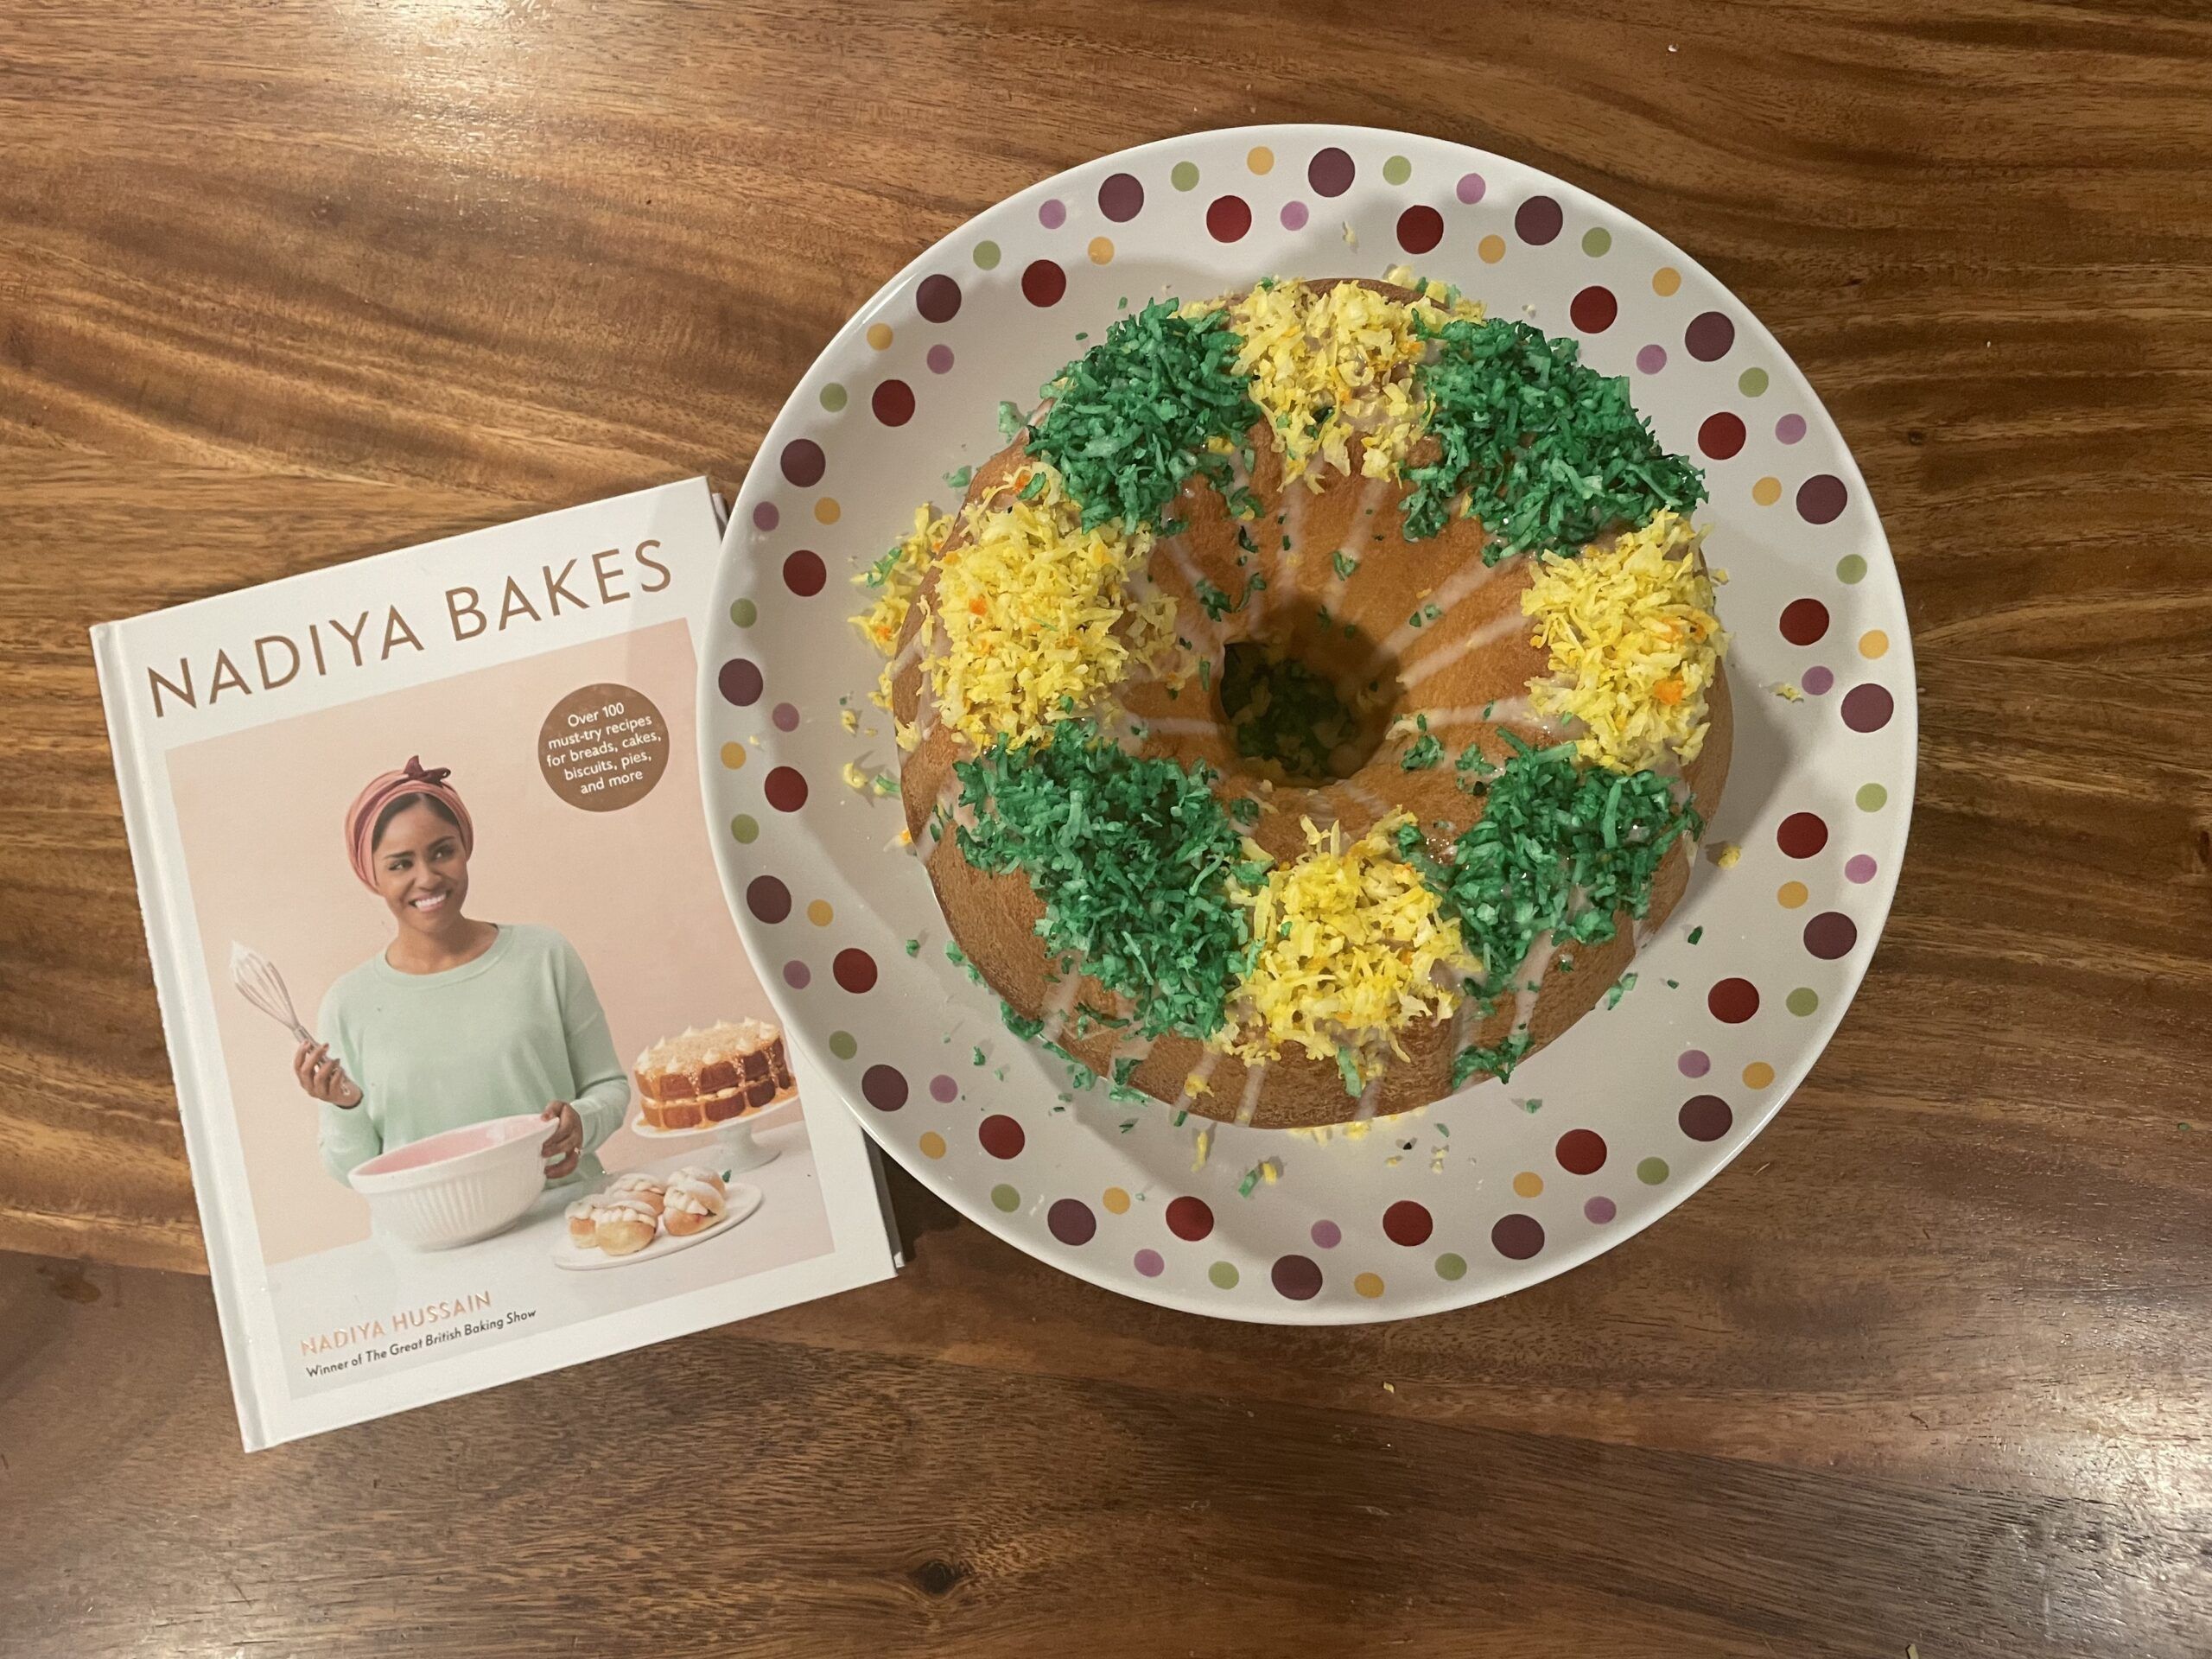 Image of a round king cake topped with green and yellow shredded coconut on a dotted serving plate next to the cookbook Nadiya Bakes